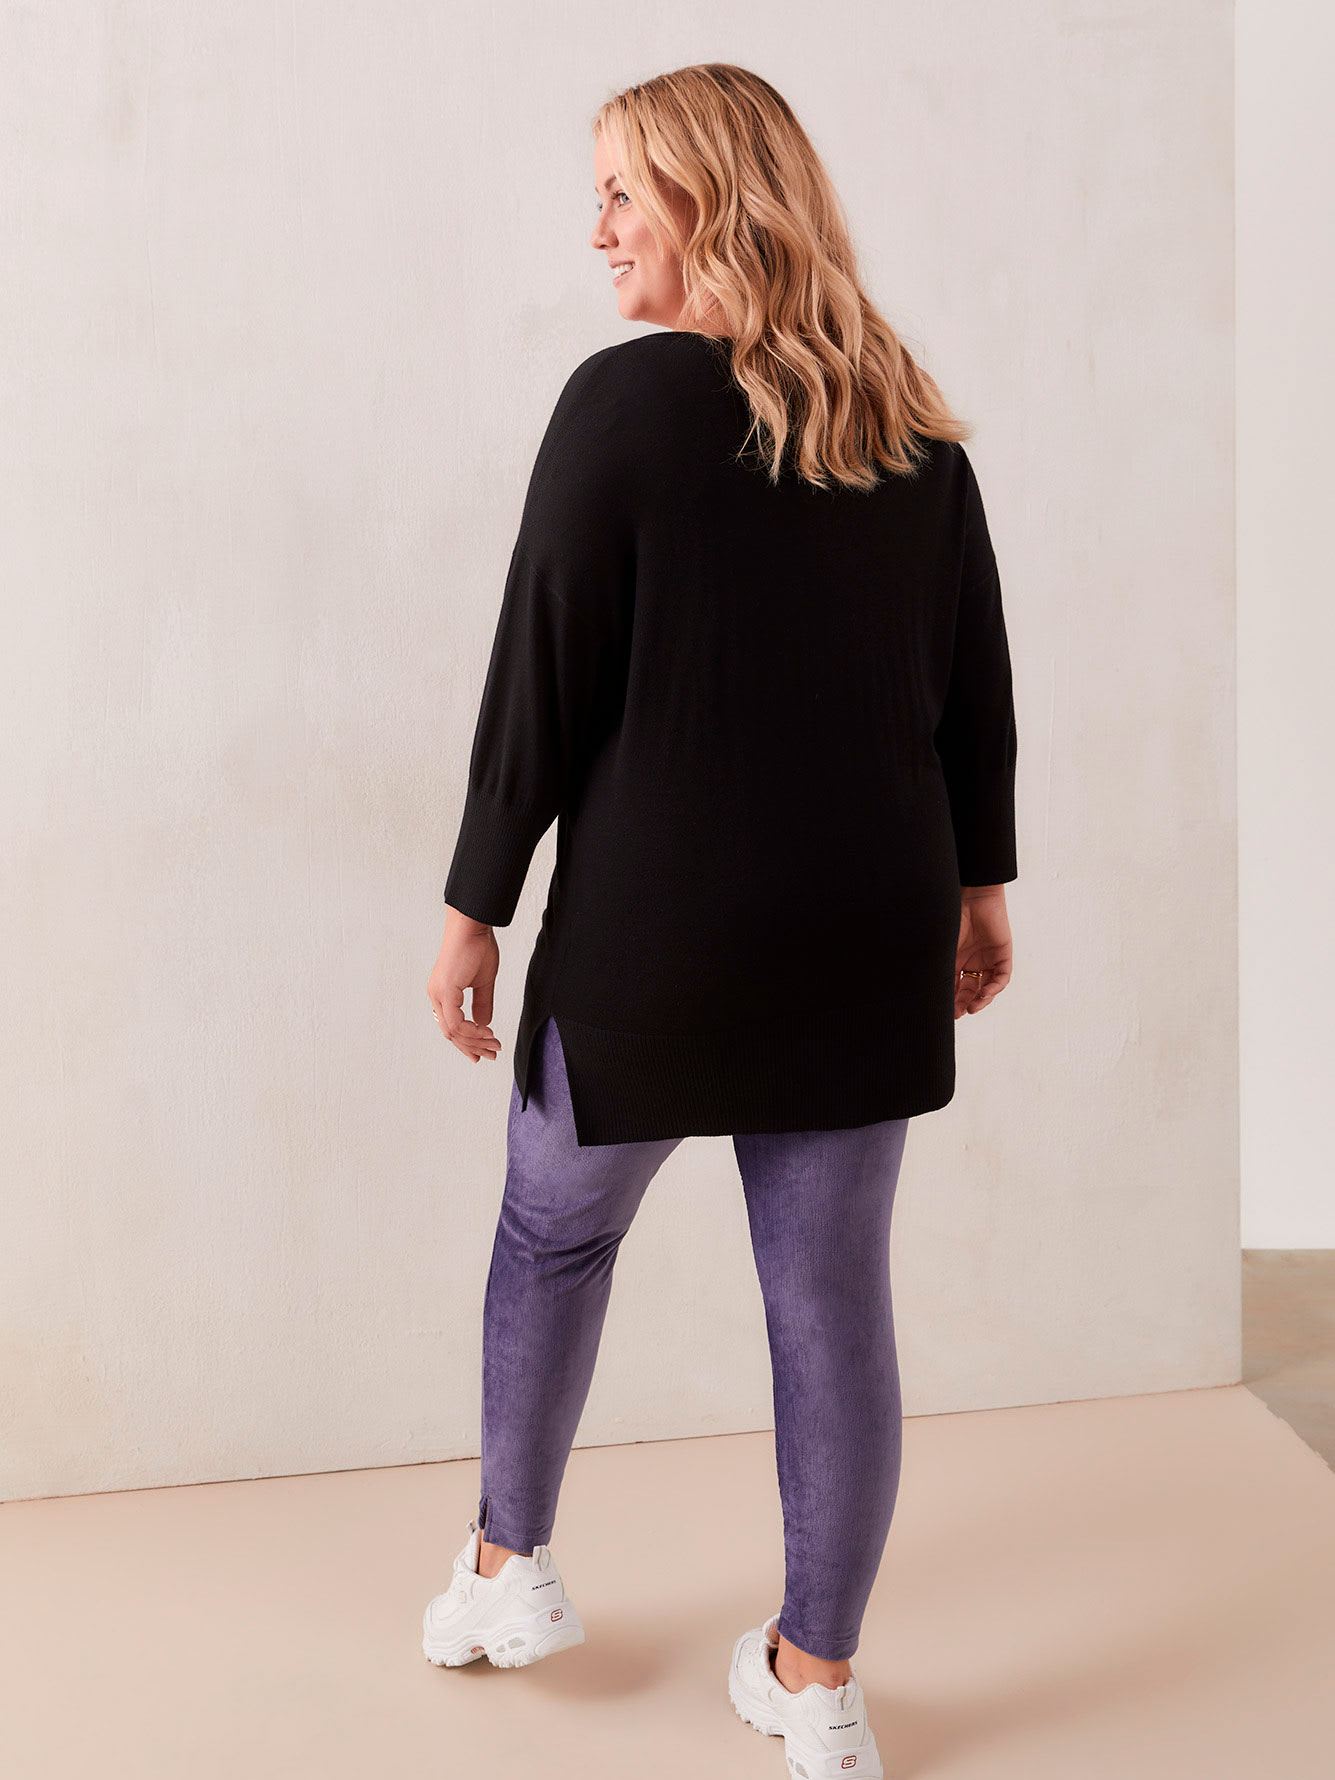 Fashion Corduroy Legging With Side Slits - In Every Story